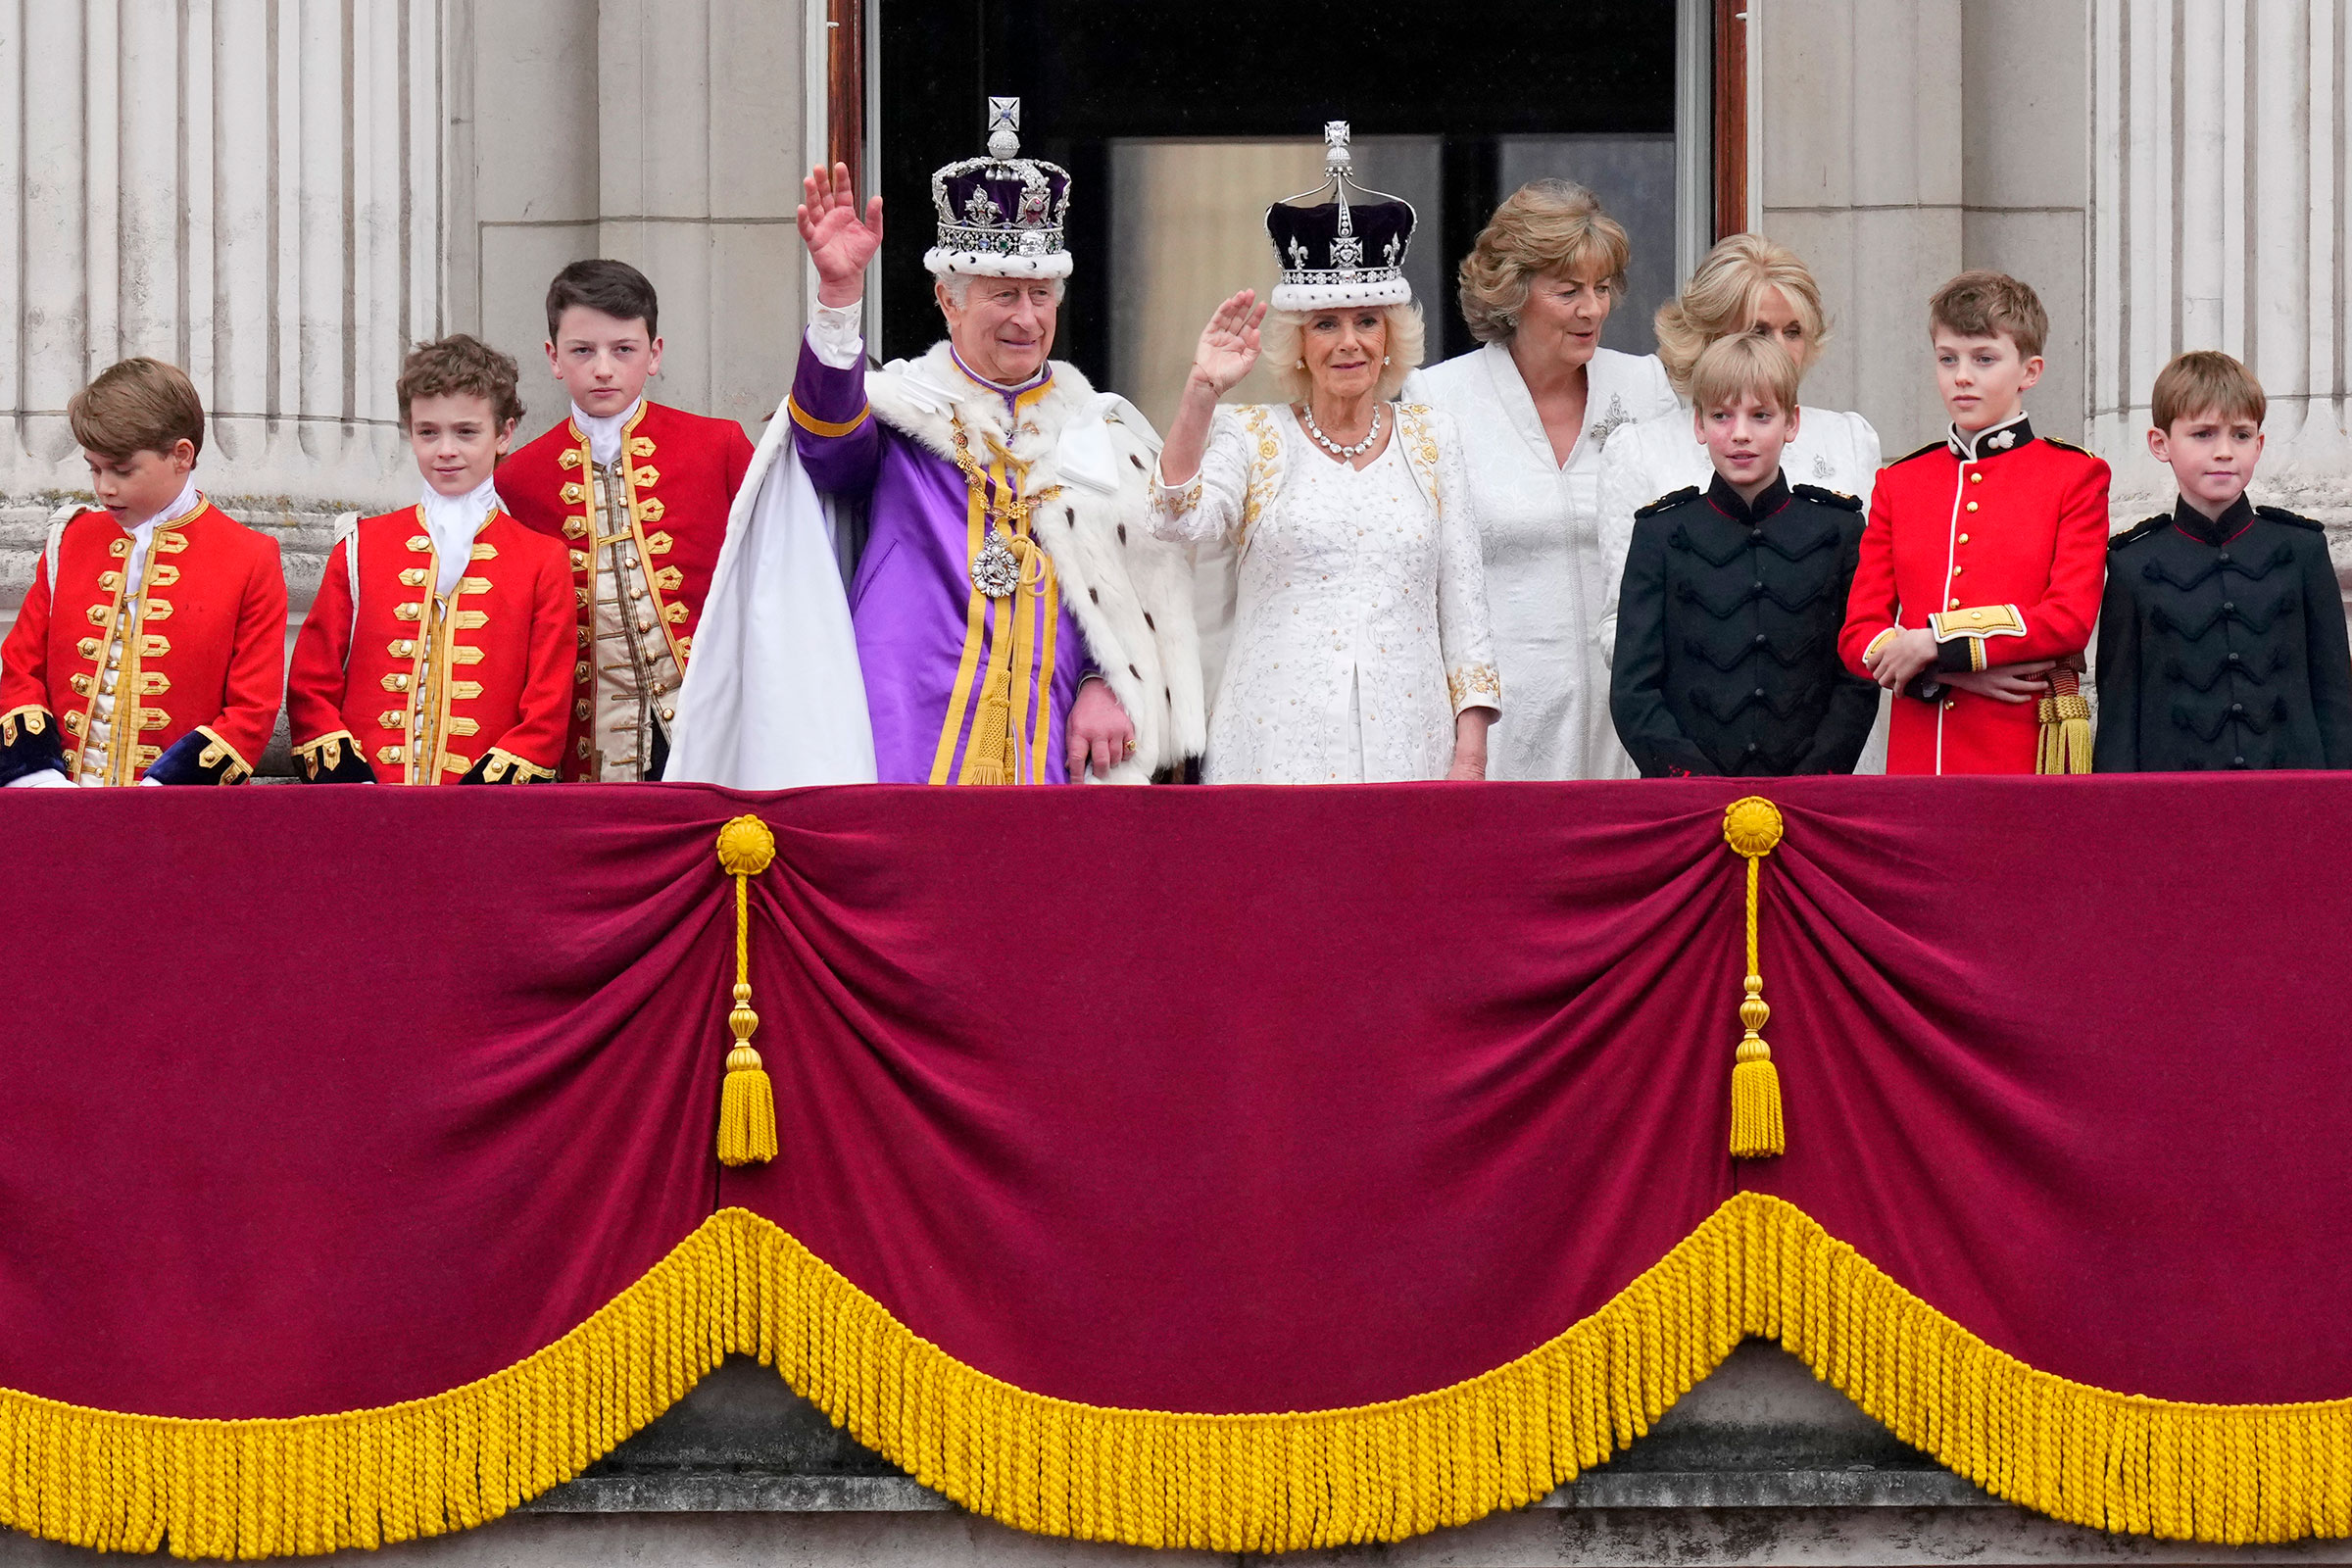 Britain's King Charles III and Queen Camilla wave to the crowds from the balcony of Buckingham Palace after their coronation ceremony.